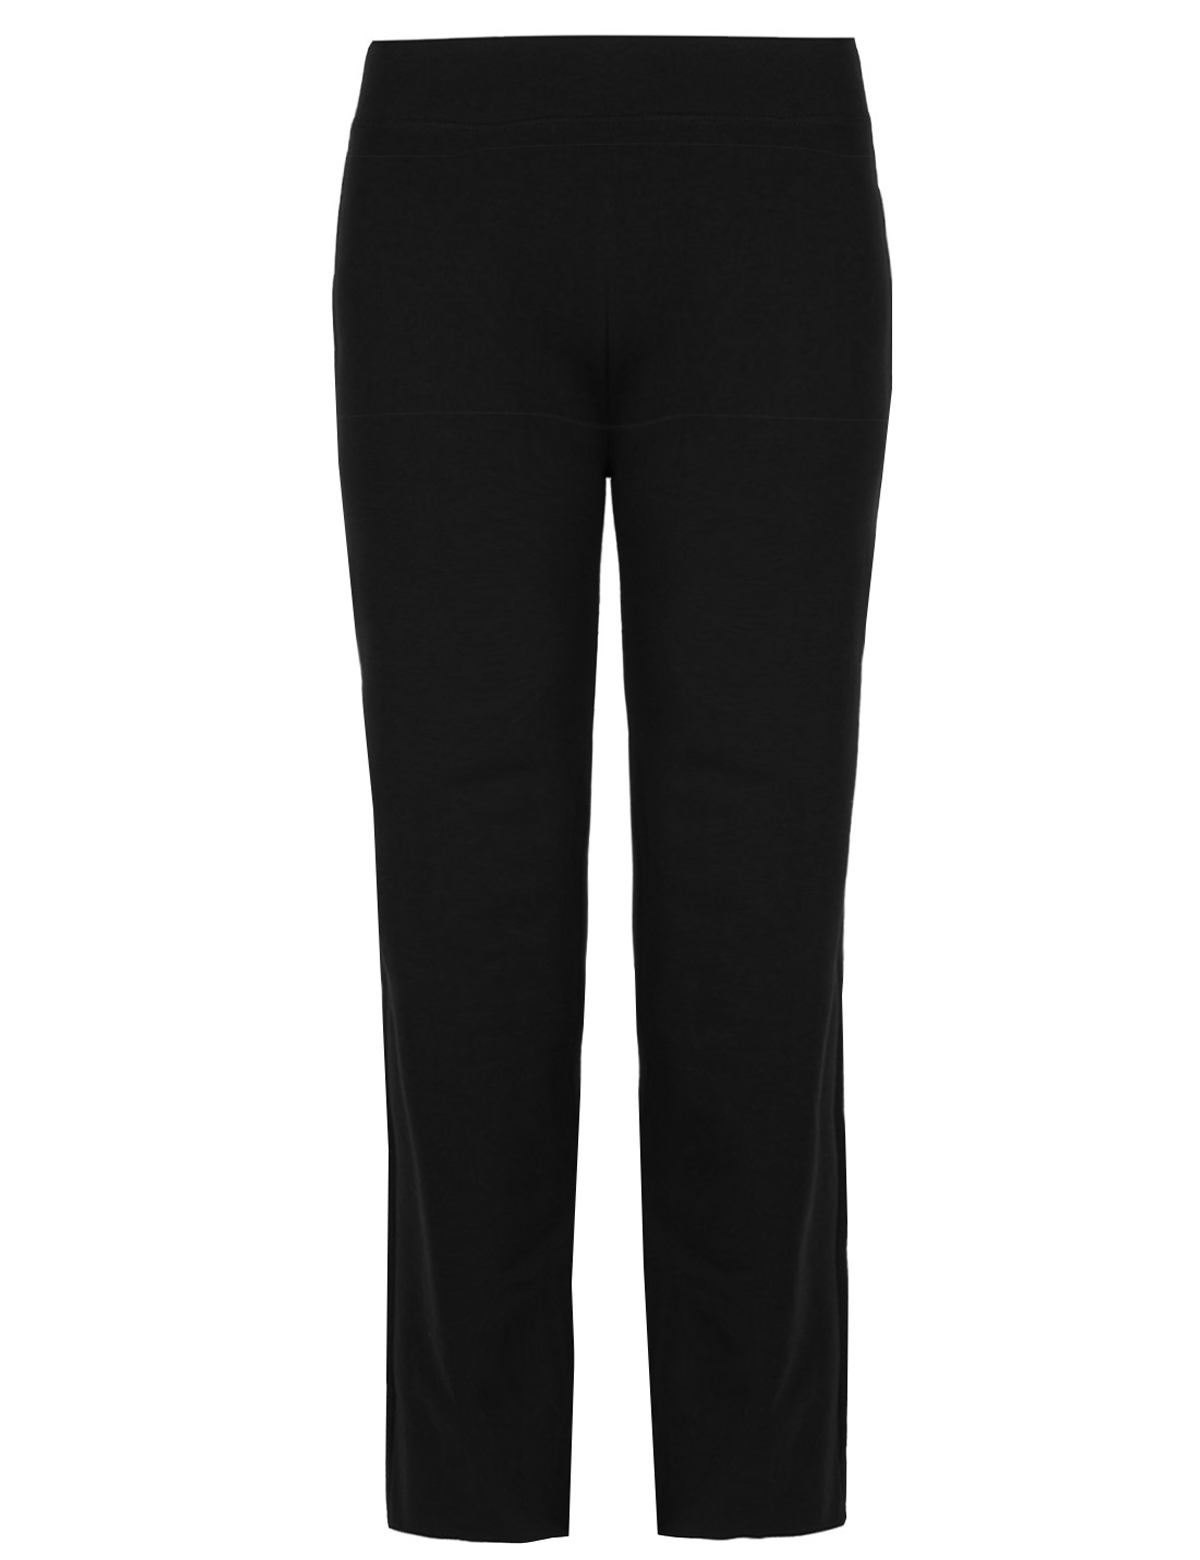 Marks and Spencer - - M&5 BLACK Cotton Rich Straight Leg Joggers - Size ...